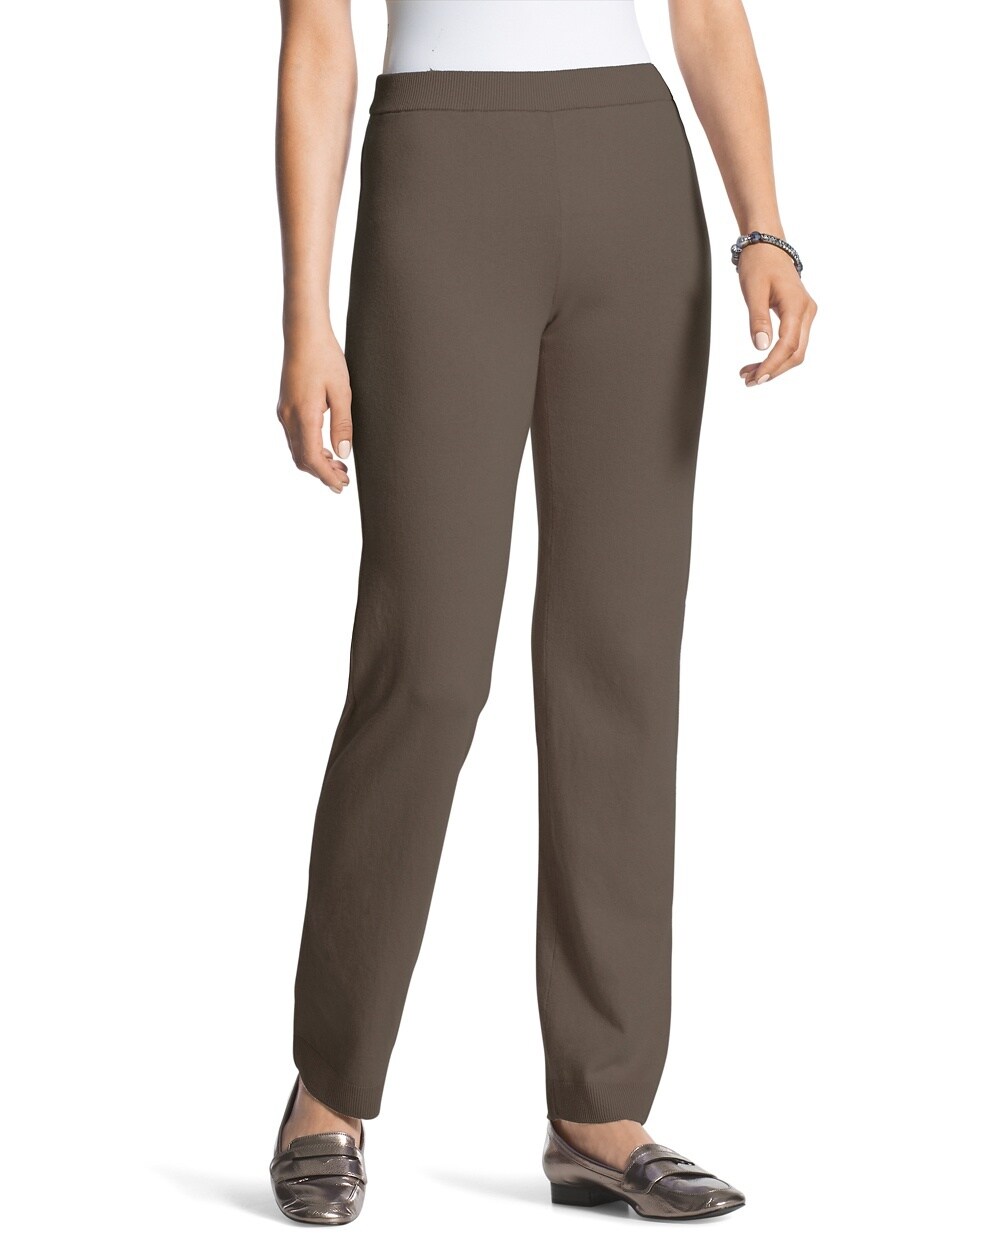 Zenergy Cotton Cashmere Pants in Taupe